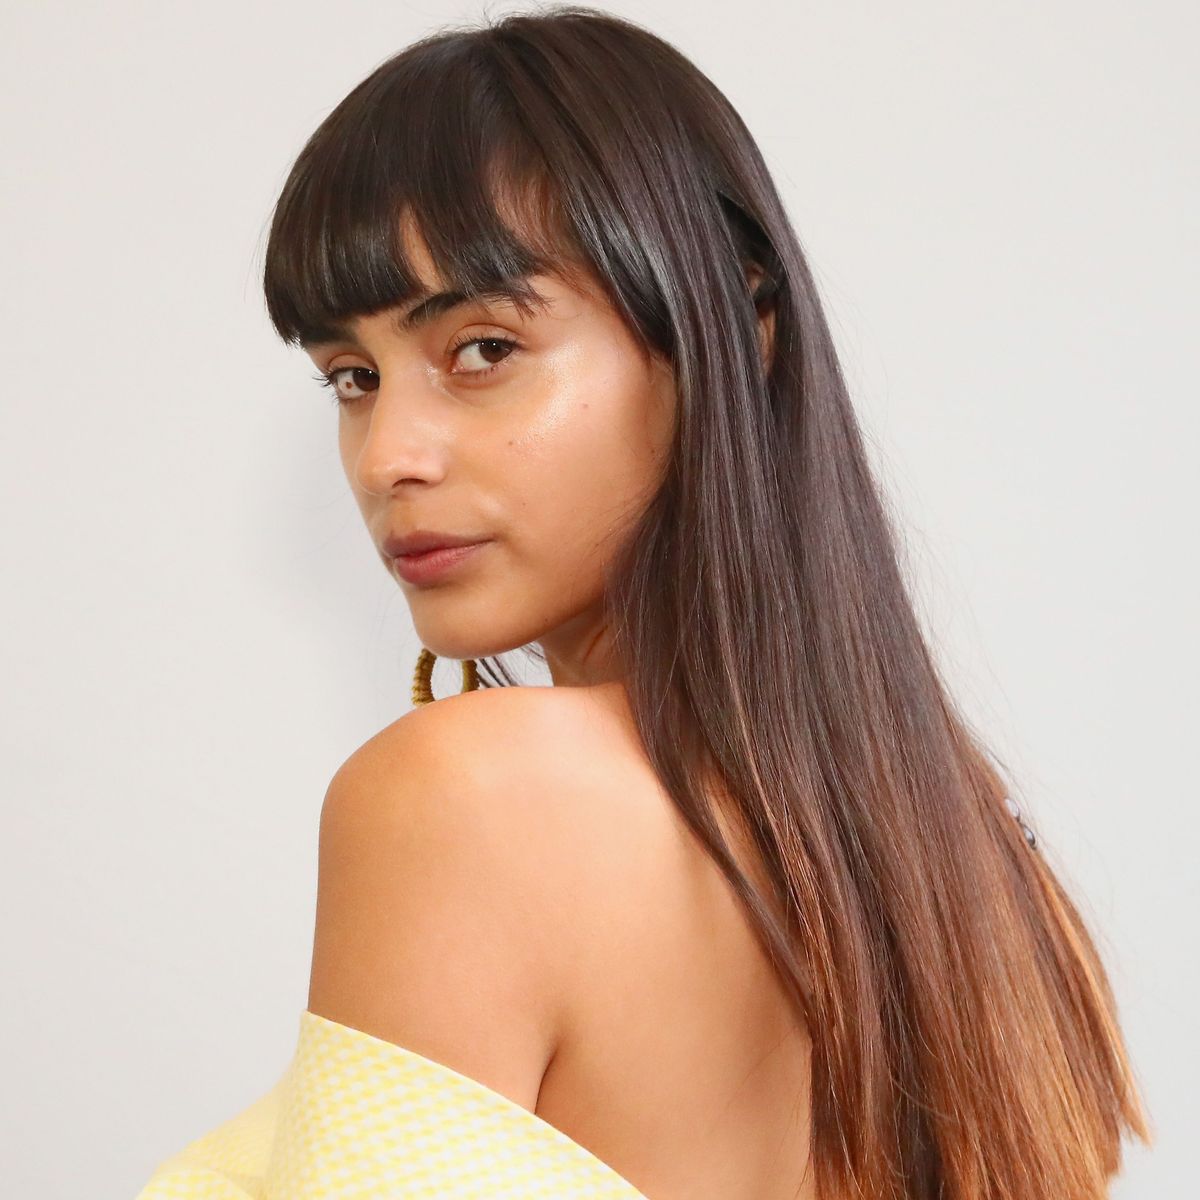 Stylist's Plaid Hair-Color Technique Is Going Viral on Instagram